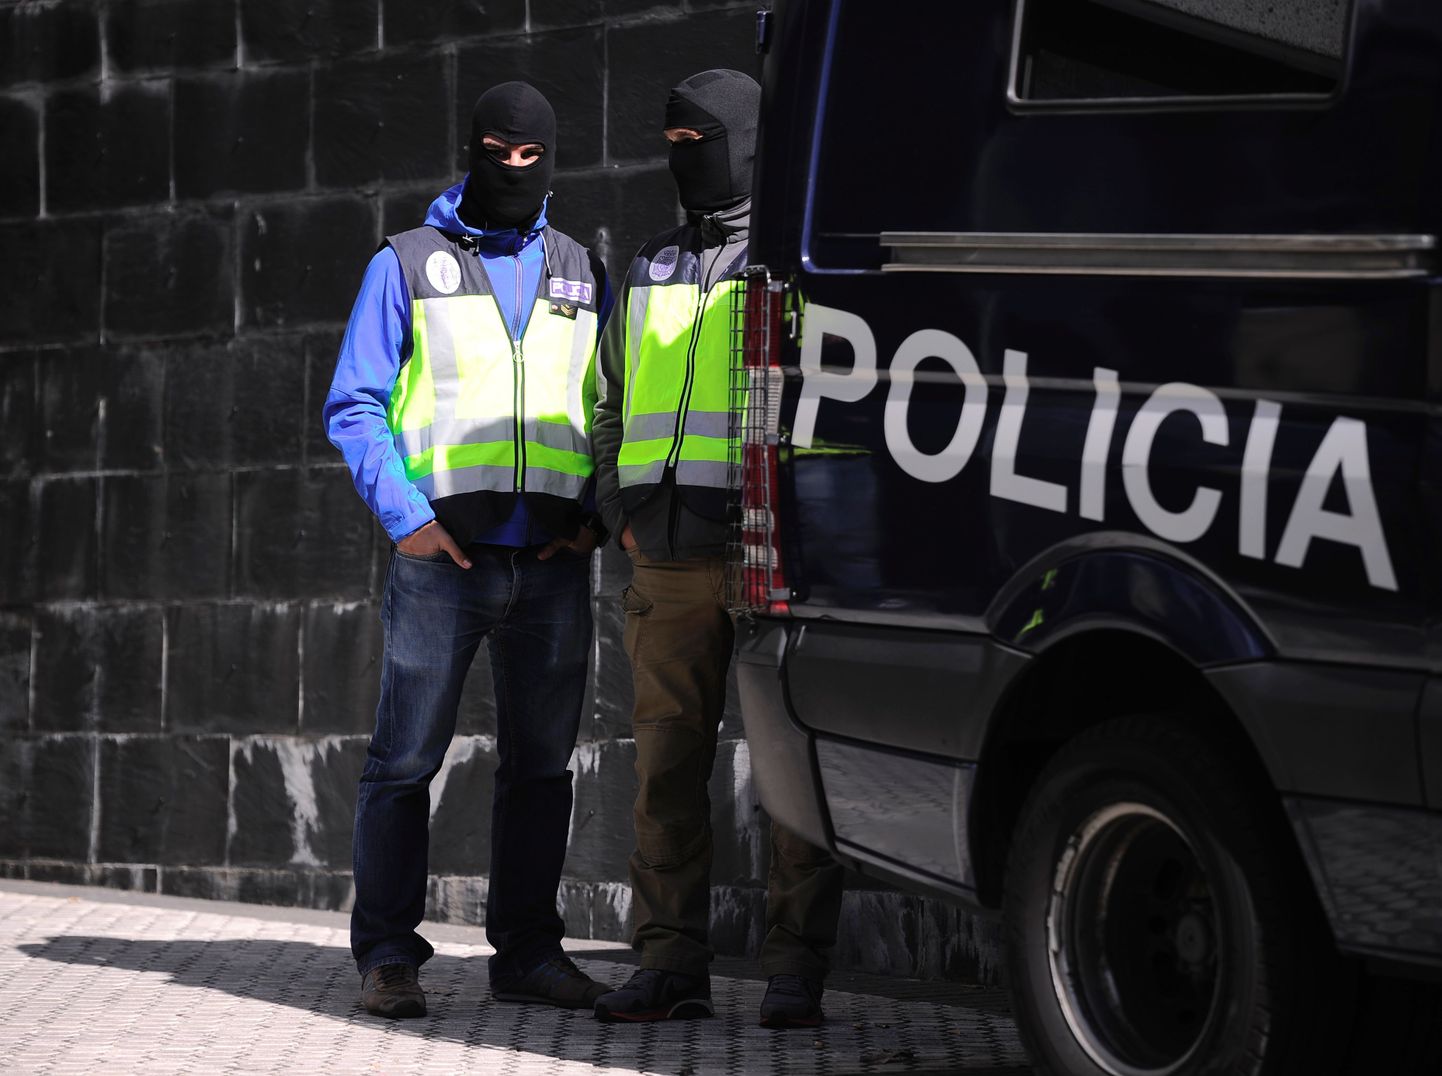 Two members of the Spanish National Police stand guard at the entrance of a building following the arrest of a man accused of collaborating with the Islamic State in San Sebastian, on October 11, 2016.
Spanish police have arrested two men on suspicion of seeking recruits for the Islamic State group, the interior ministry said today. / AFP PHOTO / ANDER GILLENEA